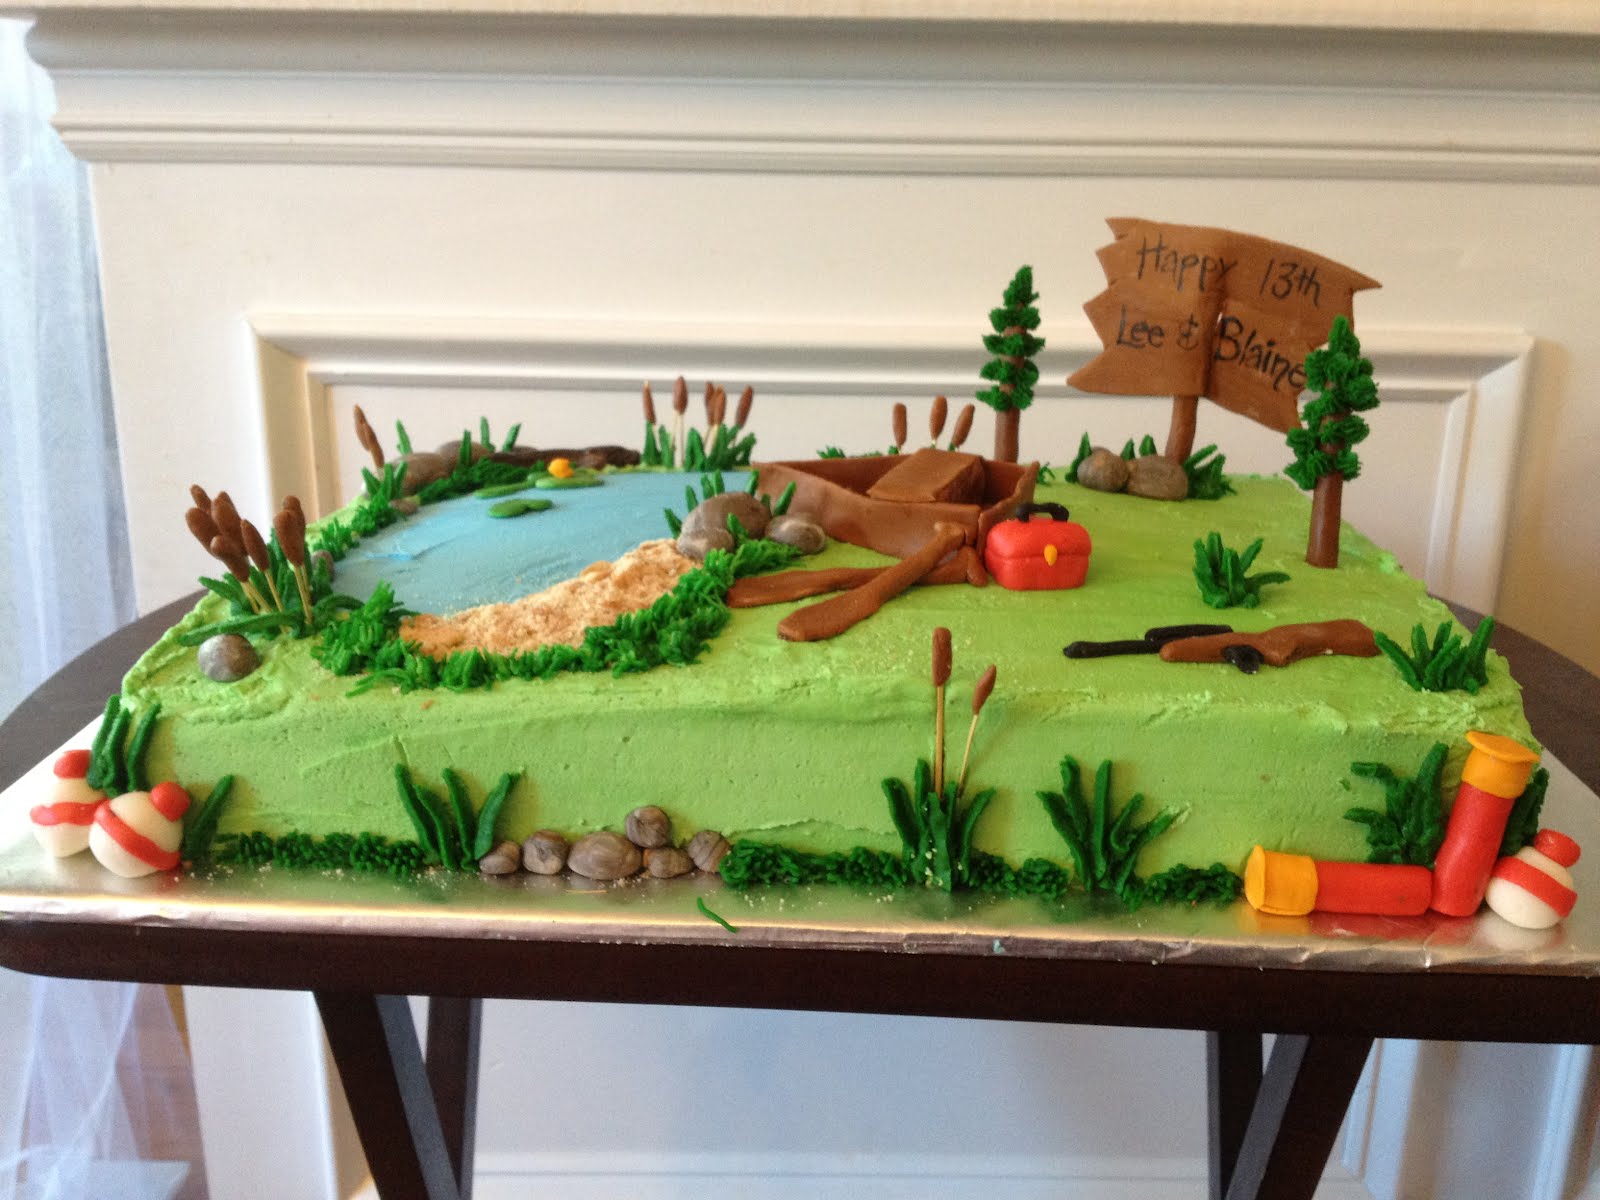 Creative Cakes N More: Hunting and Fishing Cake